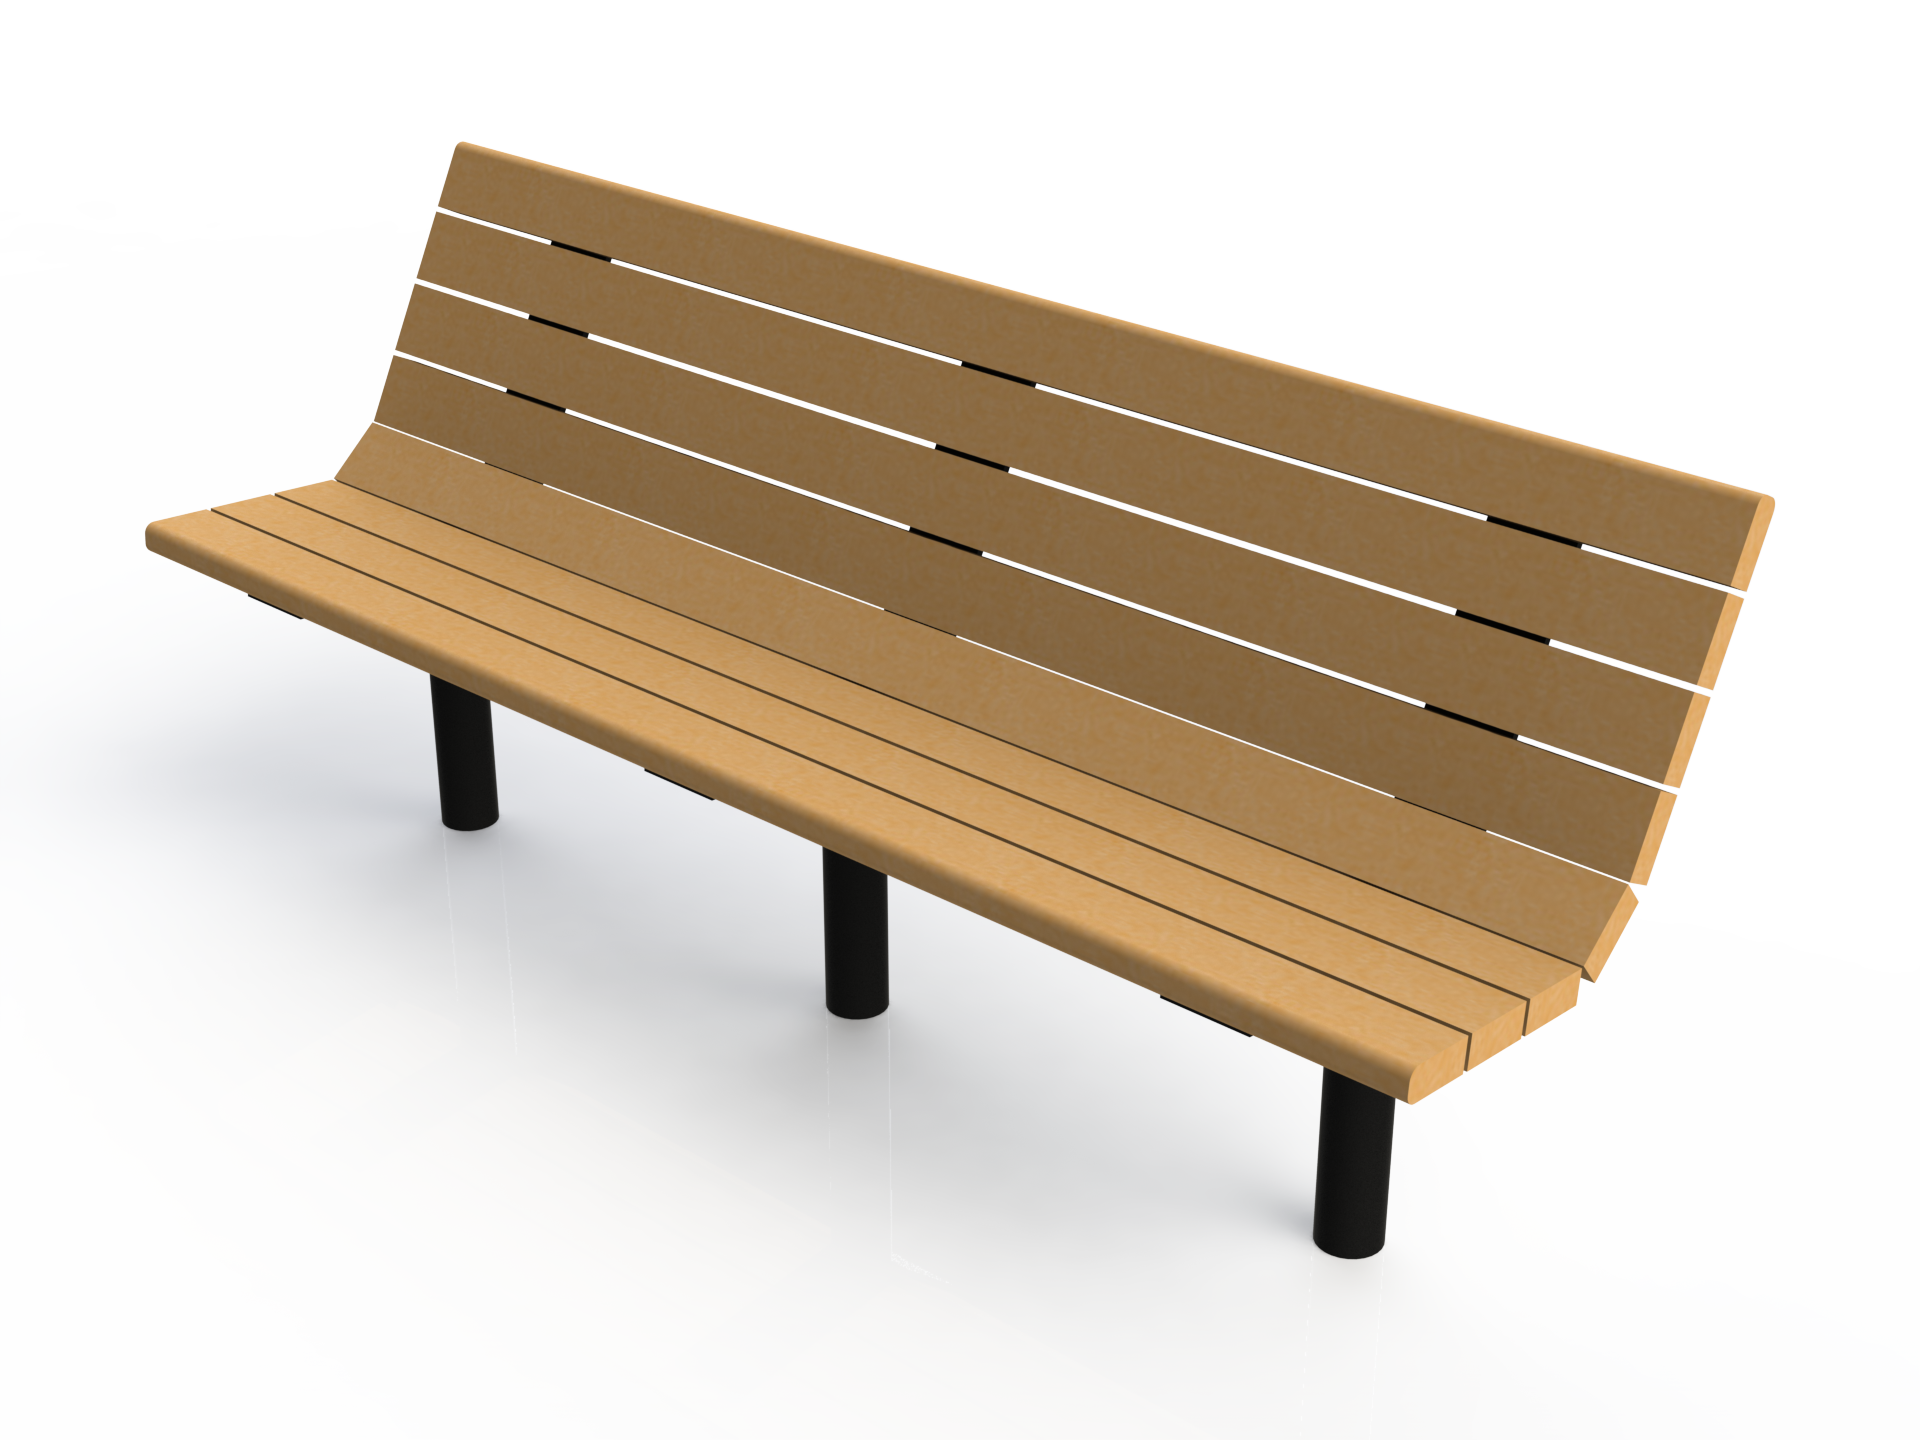 School Two Seater Bench